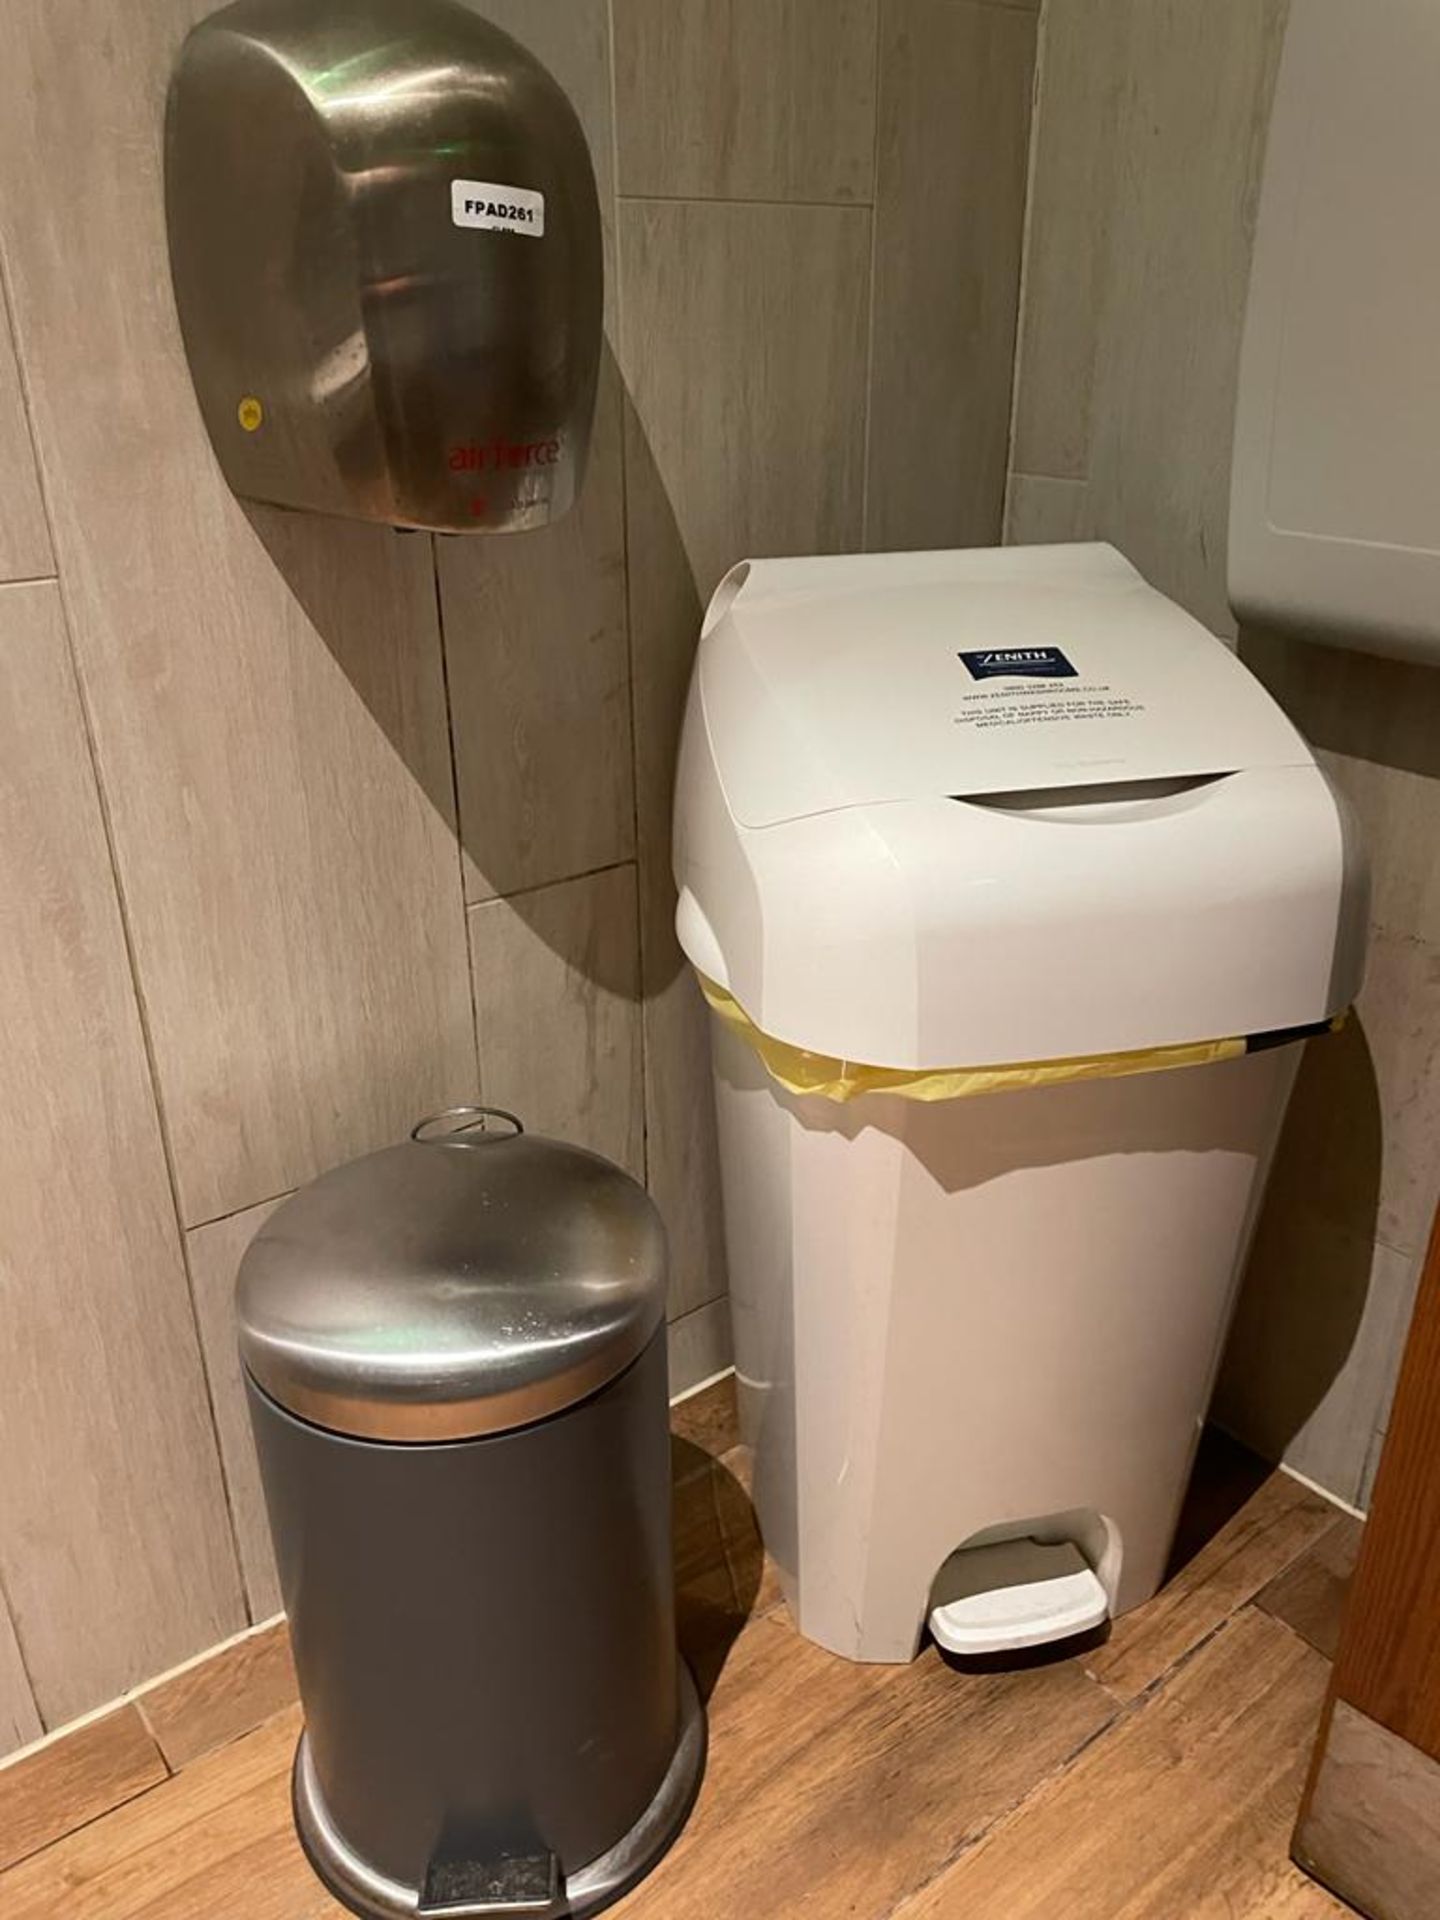 1 x Airforce Hand Dryer and Two Waste Bins - Ref: BK261 - CL686 - Location: Altrincham WA14This - Image 2 of 2